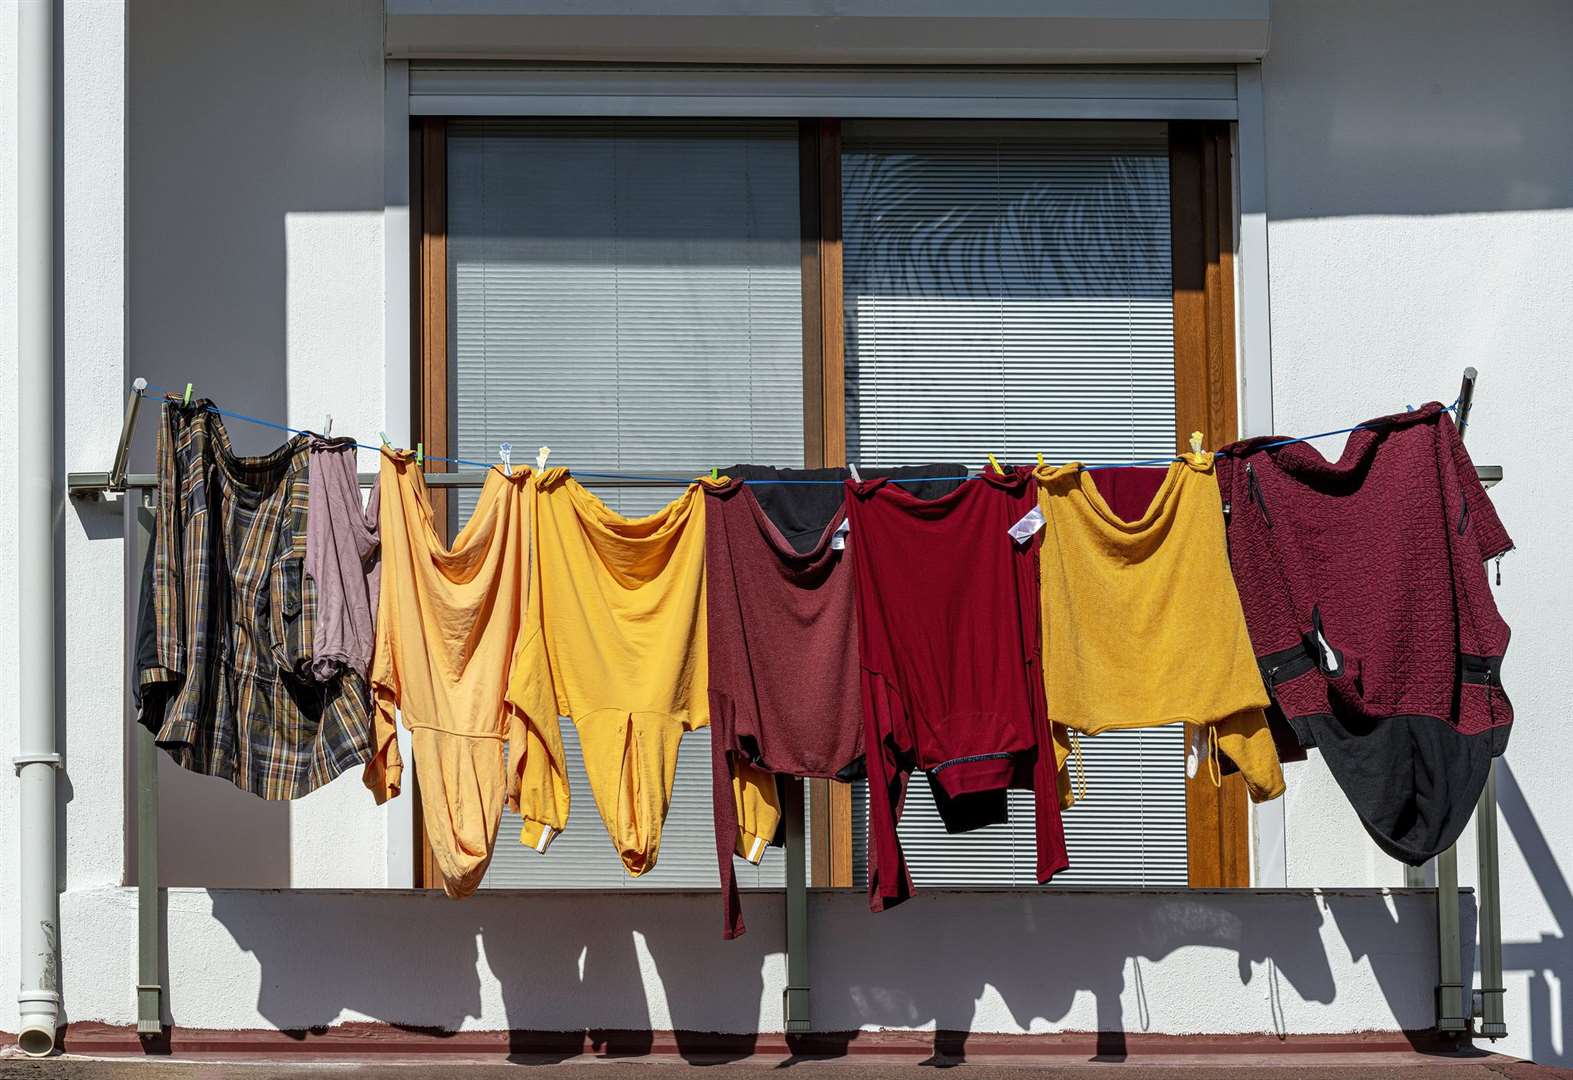 Restrictive covenants will be placed on residents hanging washing and other 'unsightly items' on balconies. Photo: iStock